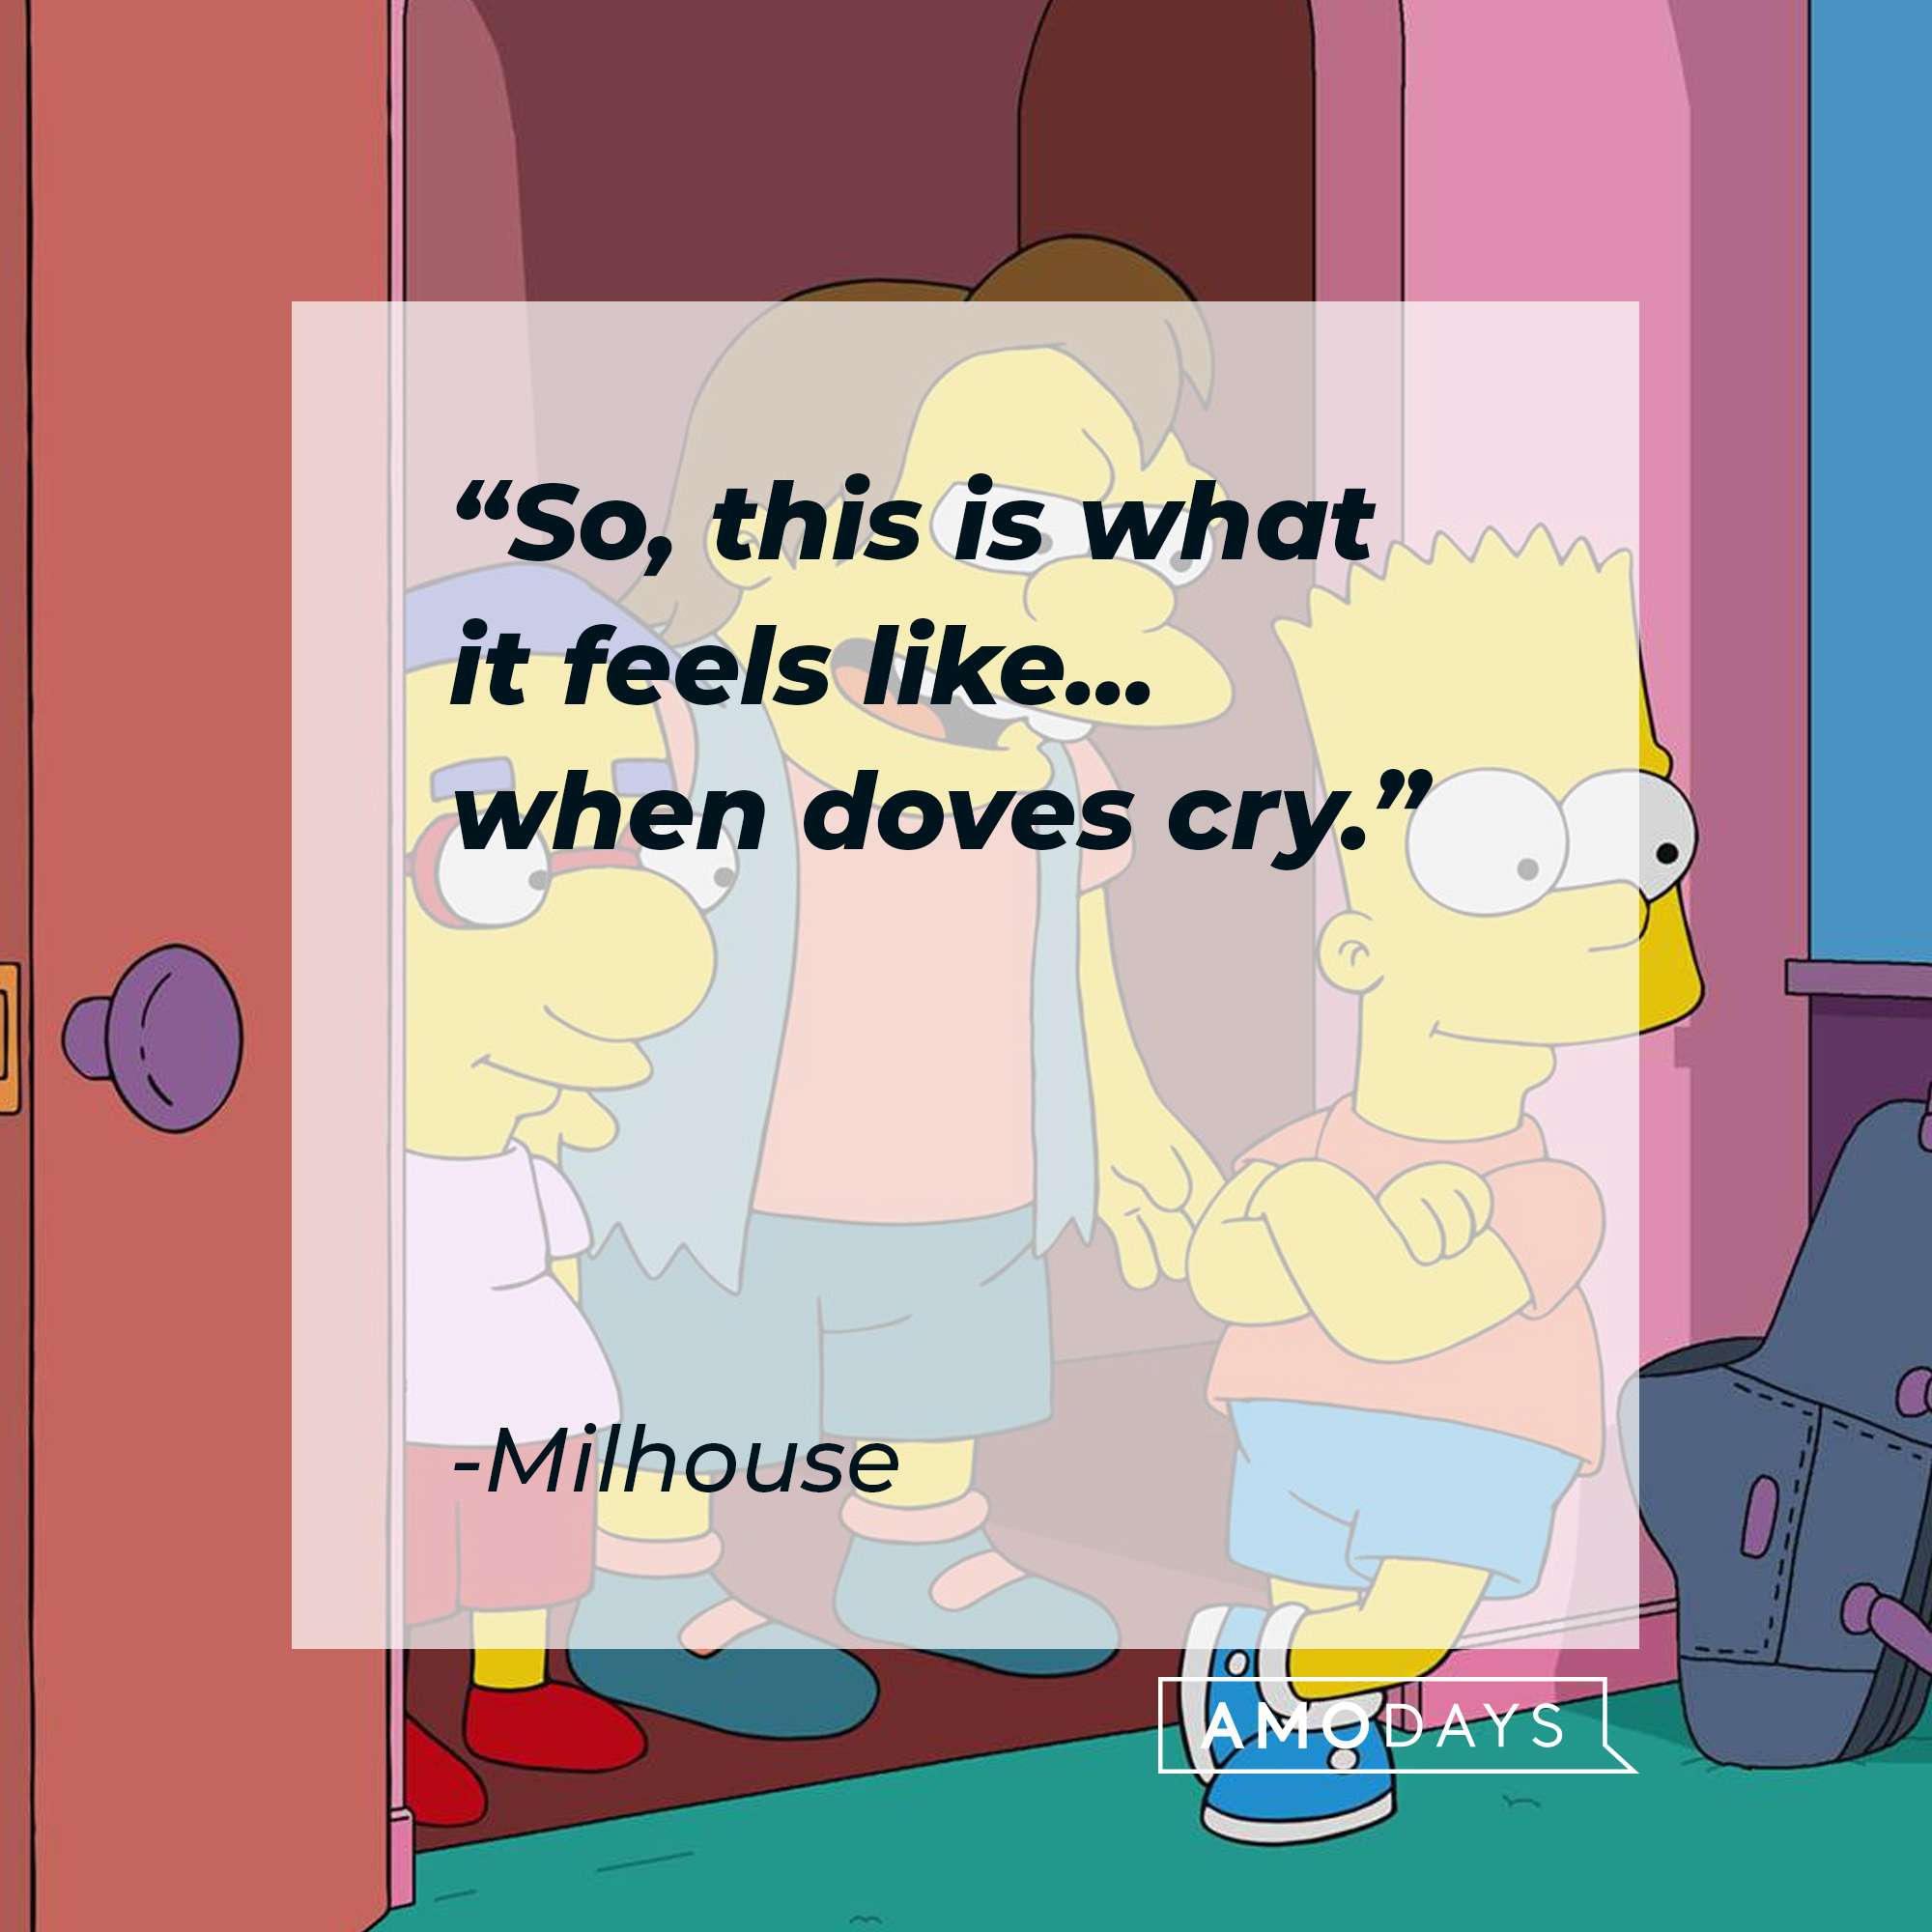 Nelson Mandela Muntz, Bart Simpson, and Milhouse, with Milhouse's quote: “So, this is what it feels like...when doves cry.” | Source: facebook.com/TheSimpsons